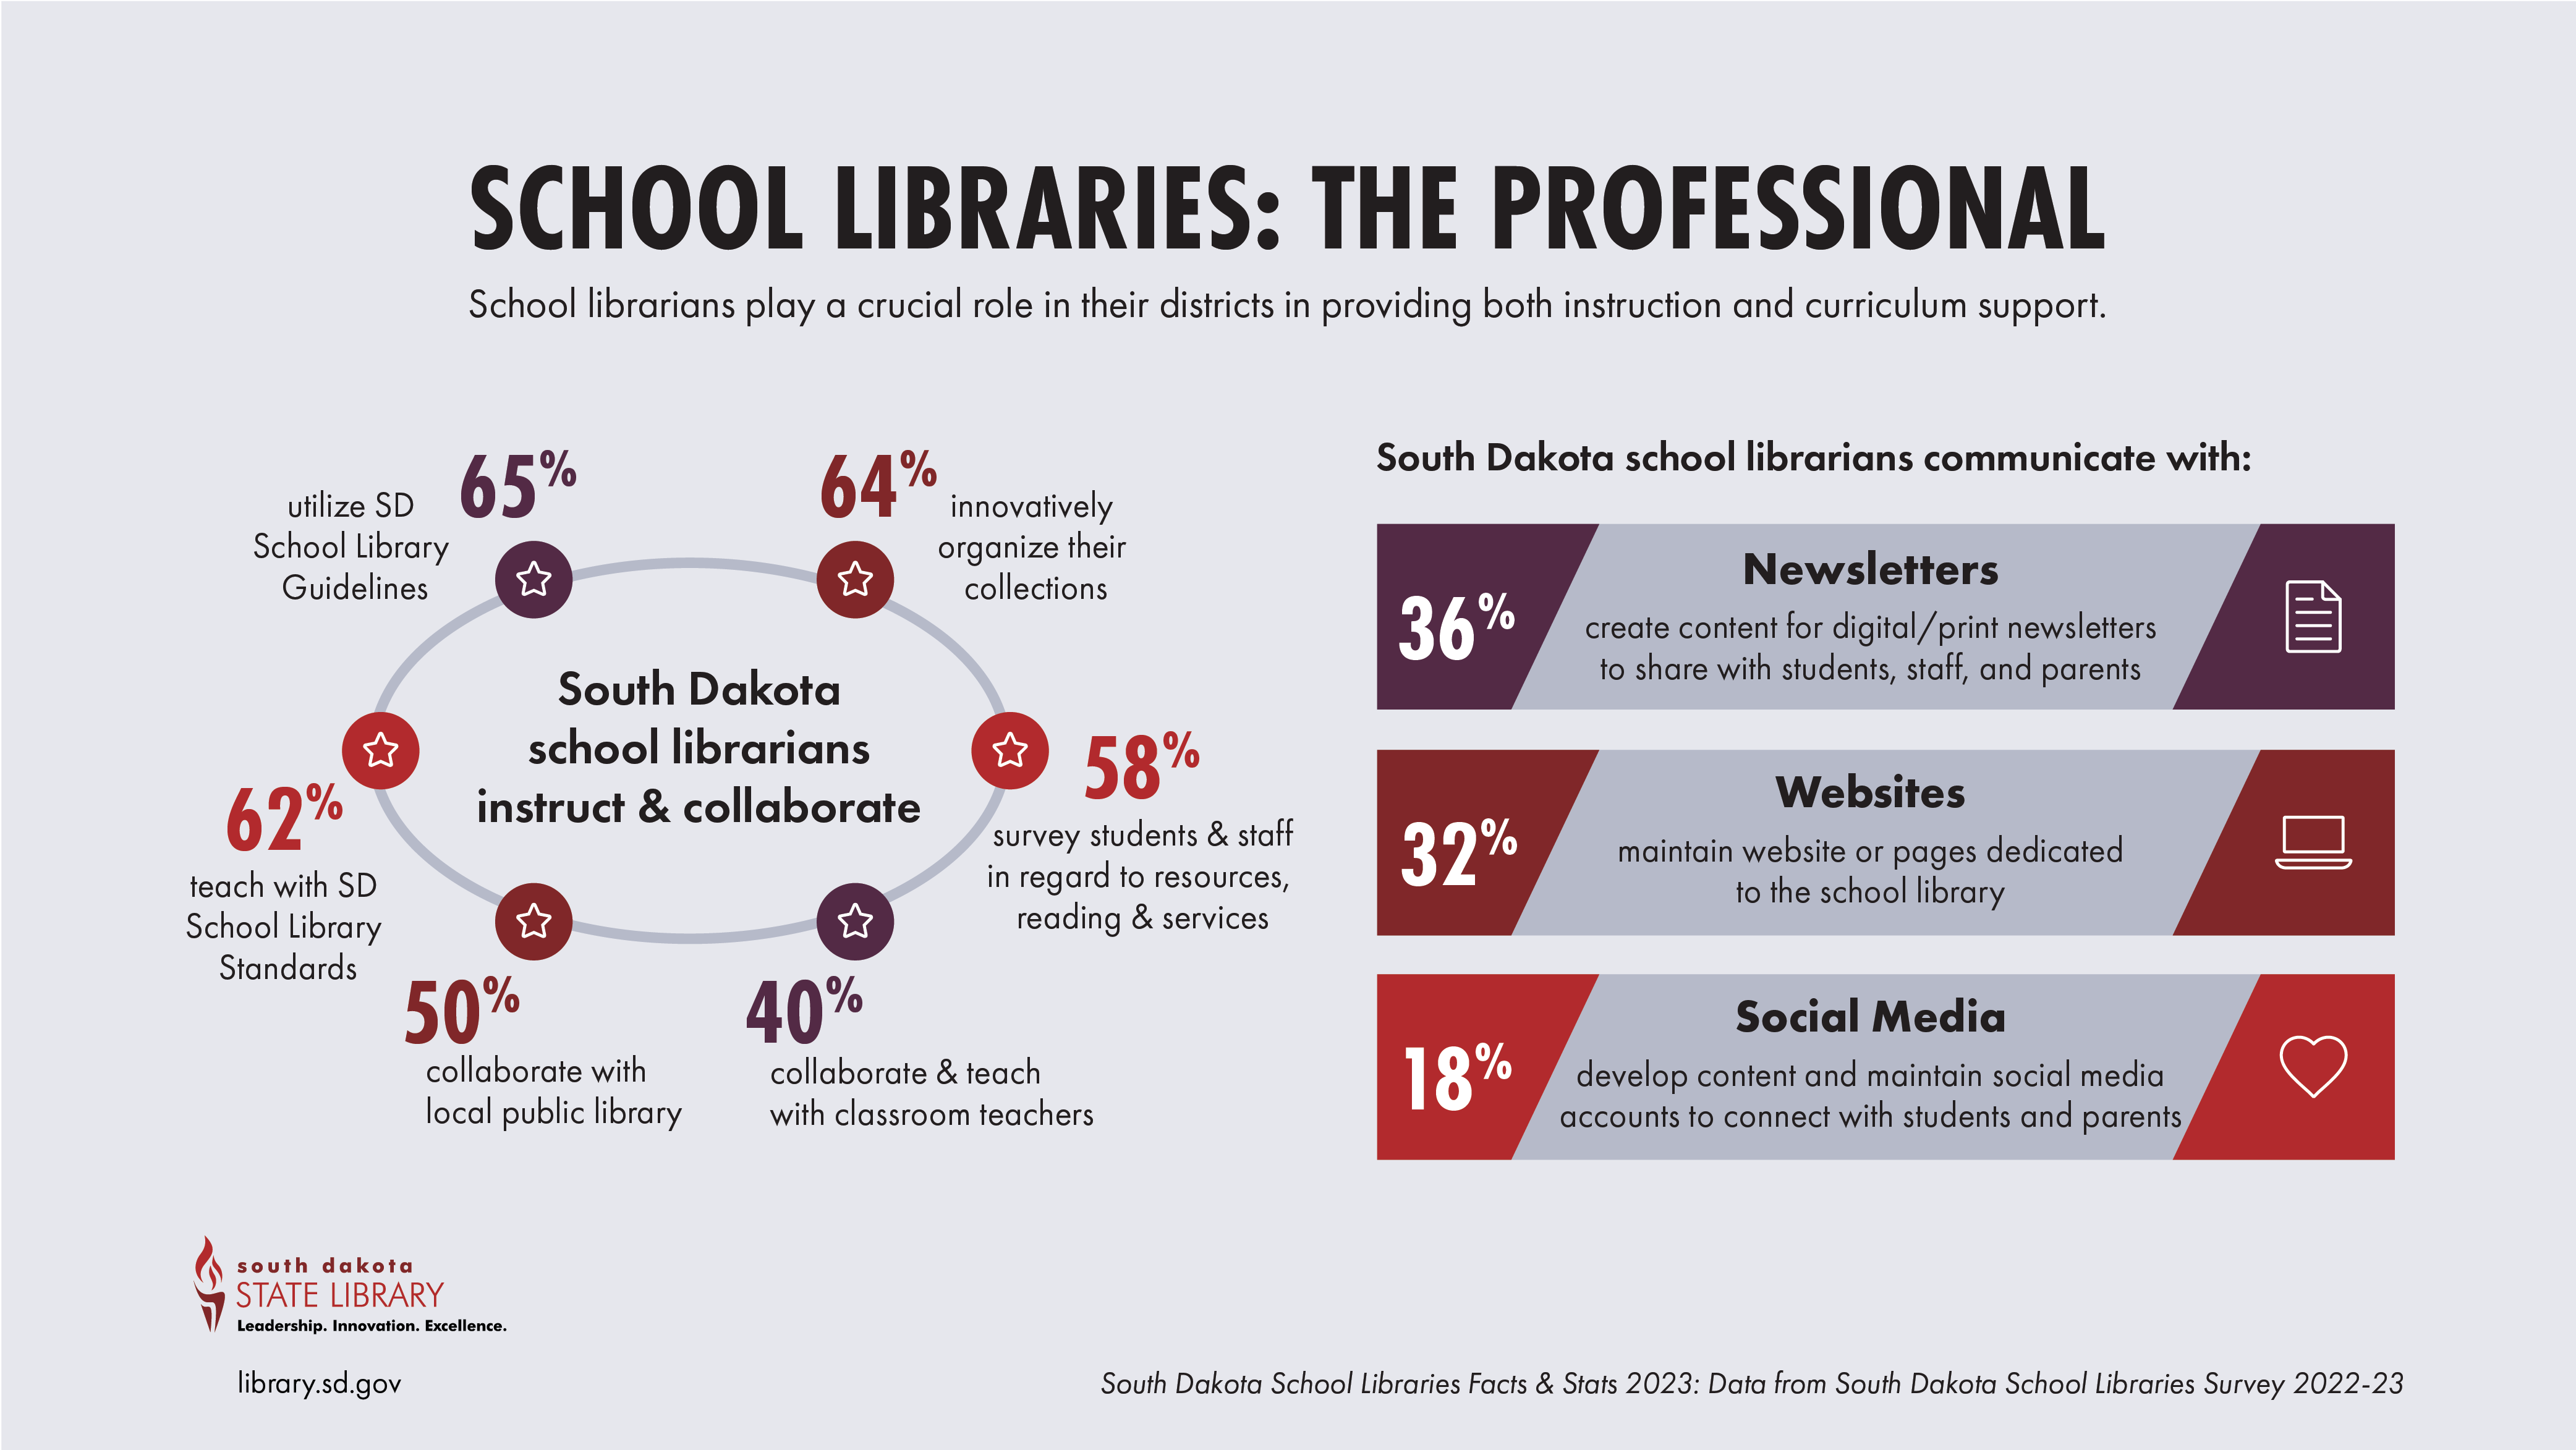 school librarians instruct and collaborate; school librarians communicate